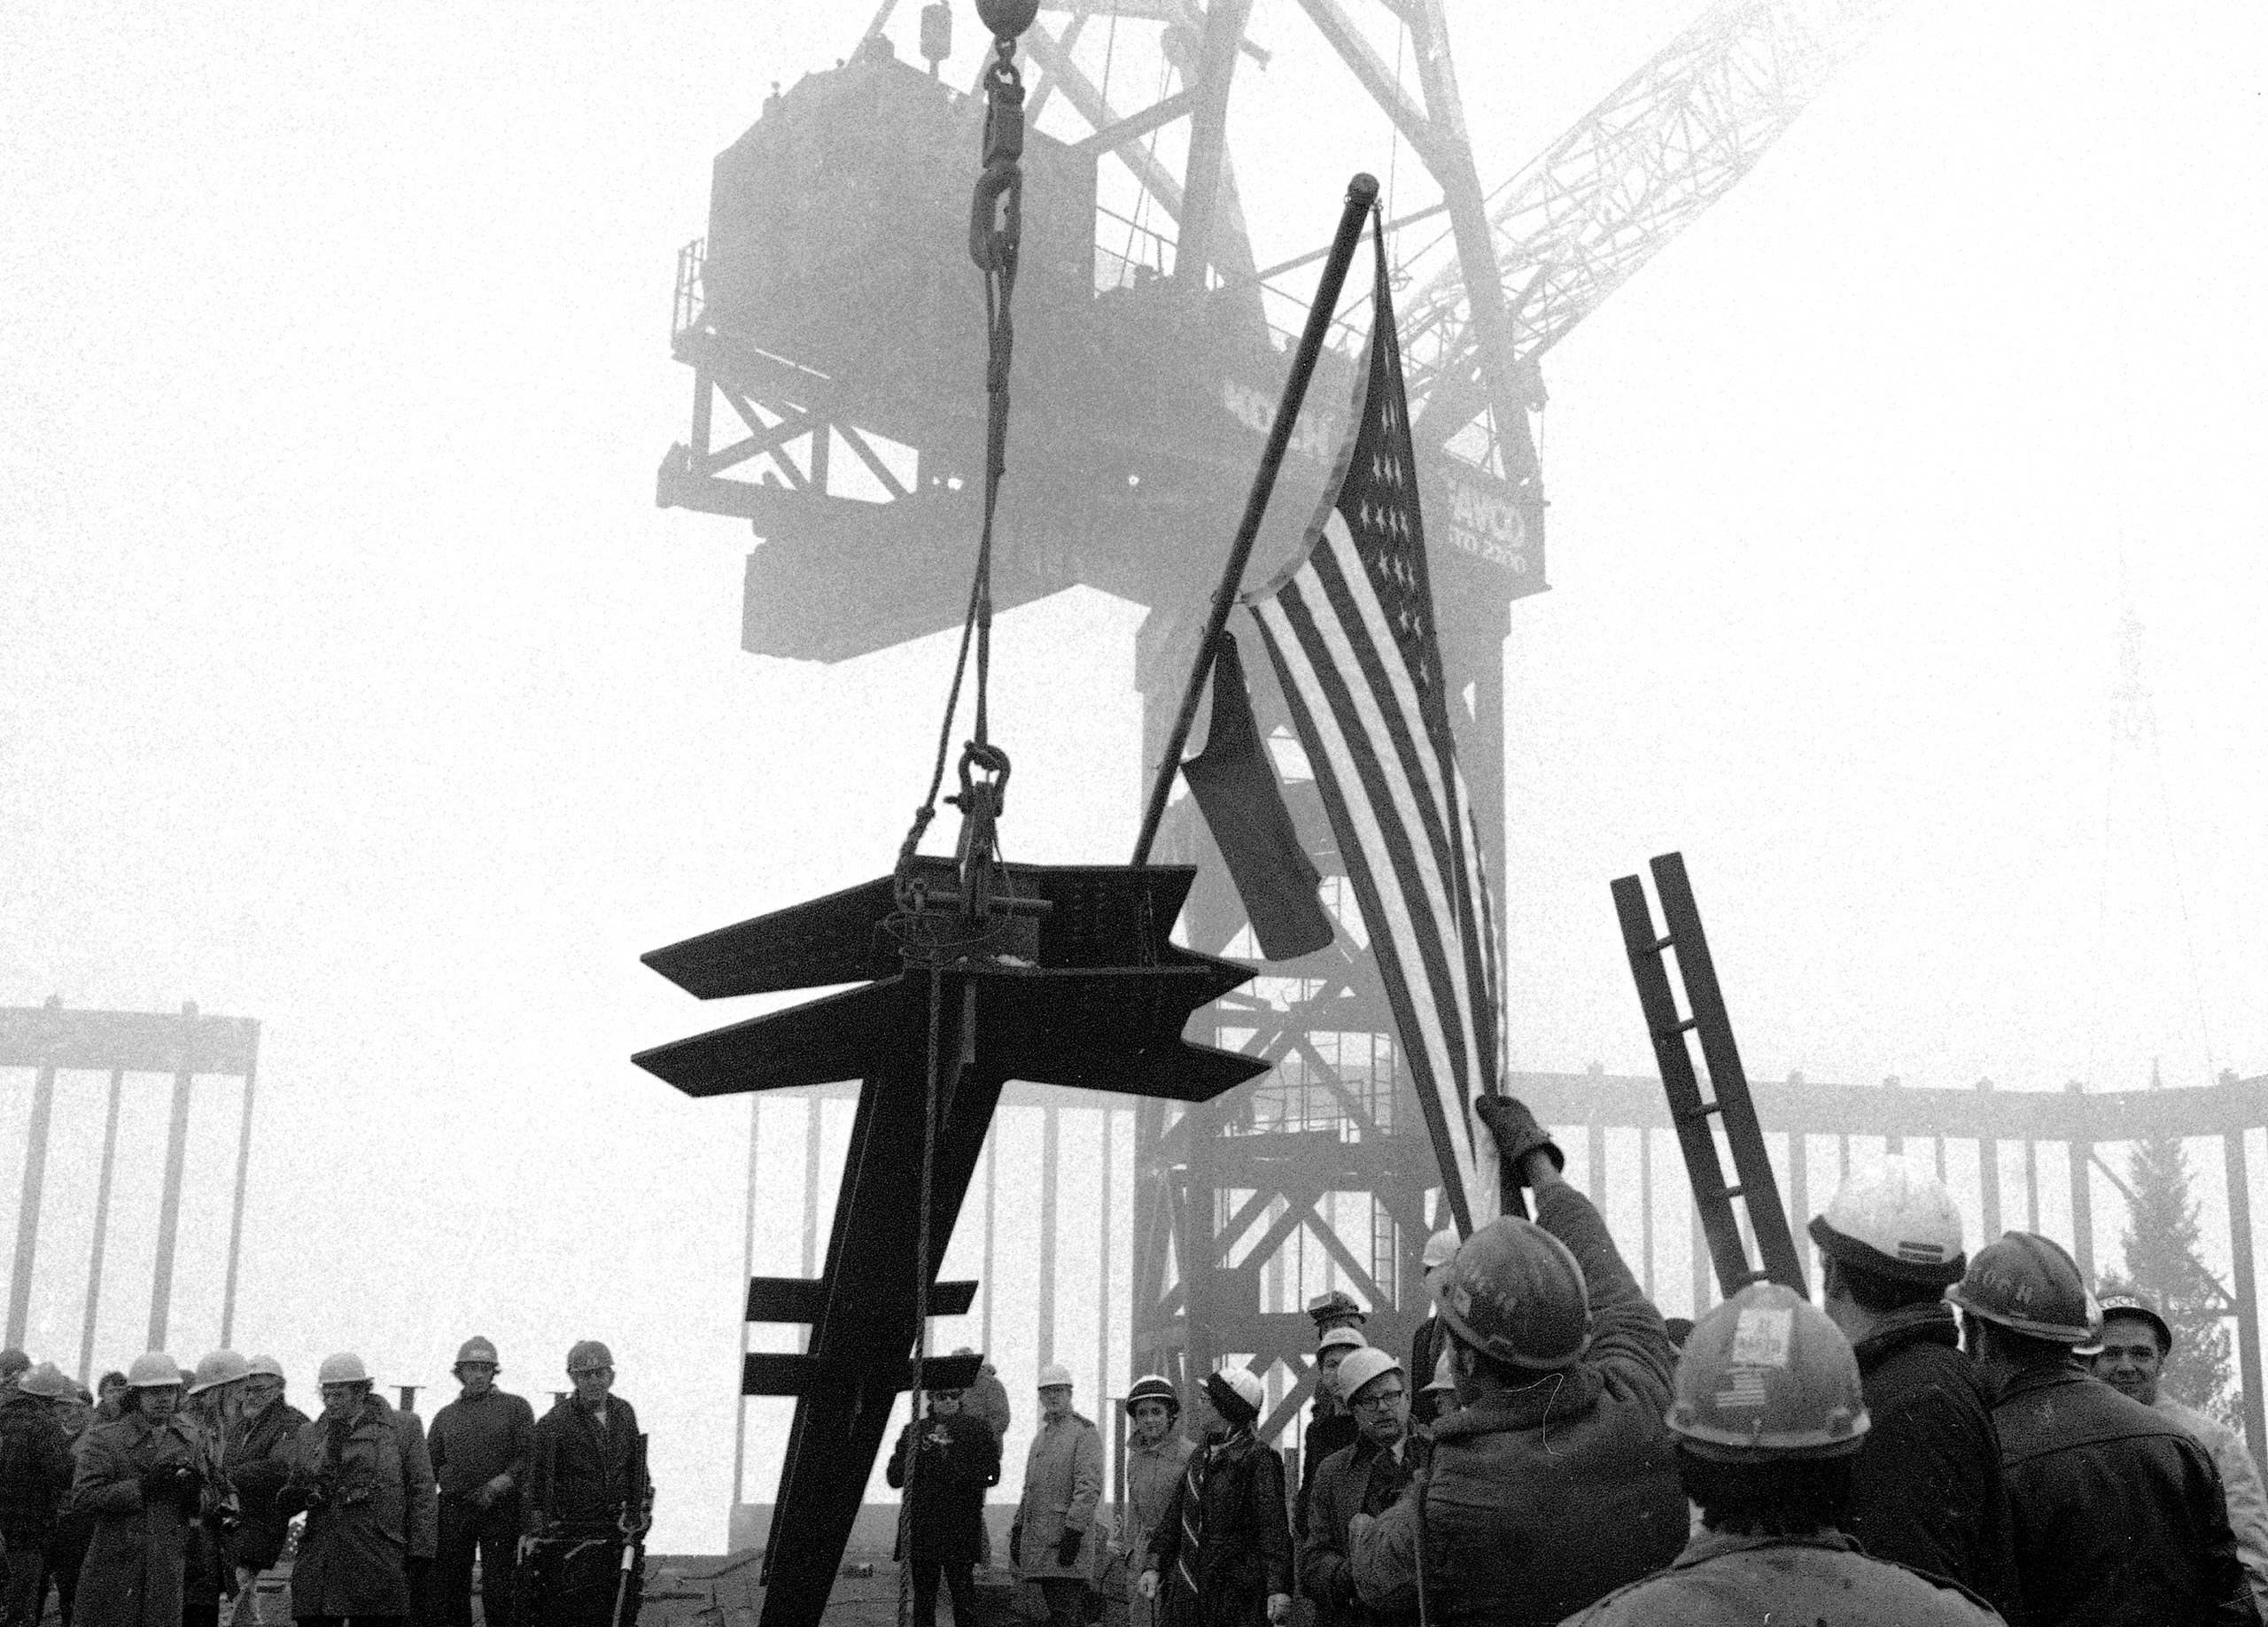 A 36-foot long, 4-ton column is hoisted atop the new world's tallest building, the World Trade Center, still under construction in New York City, Dec. 23, 1970.